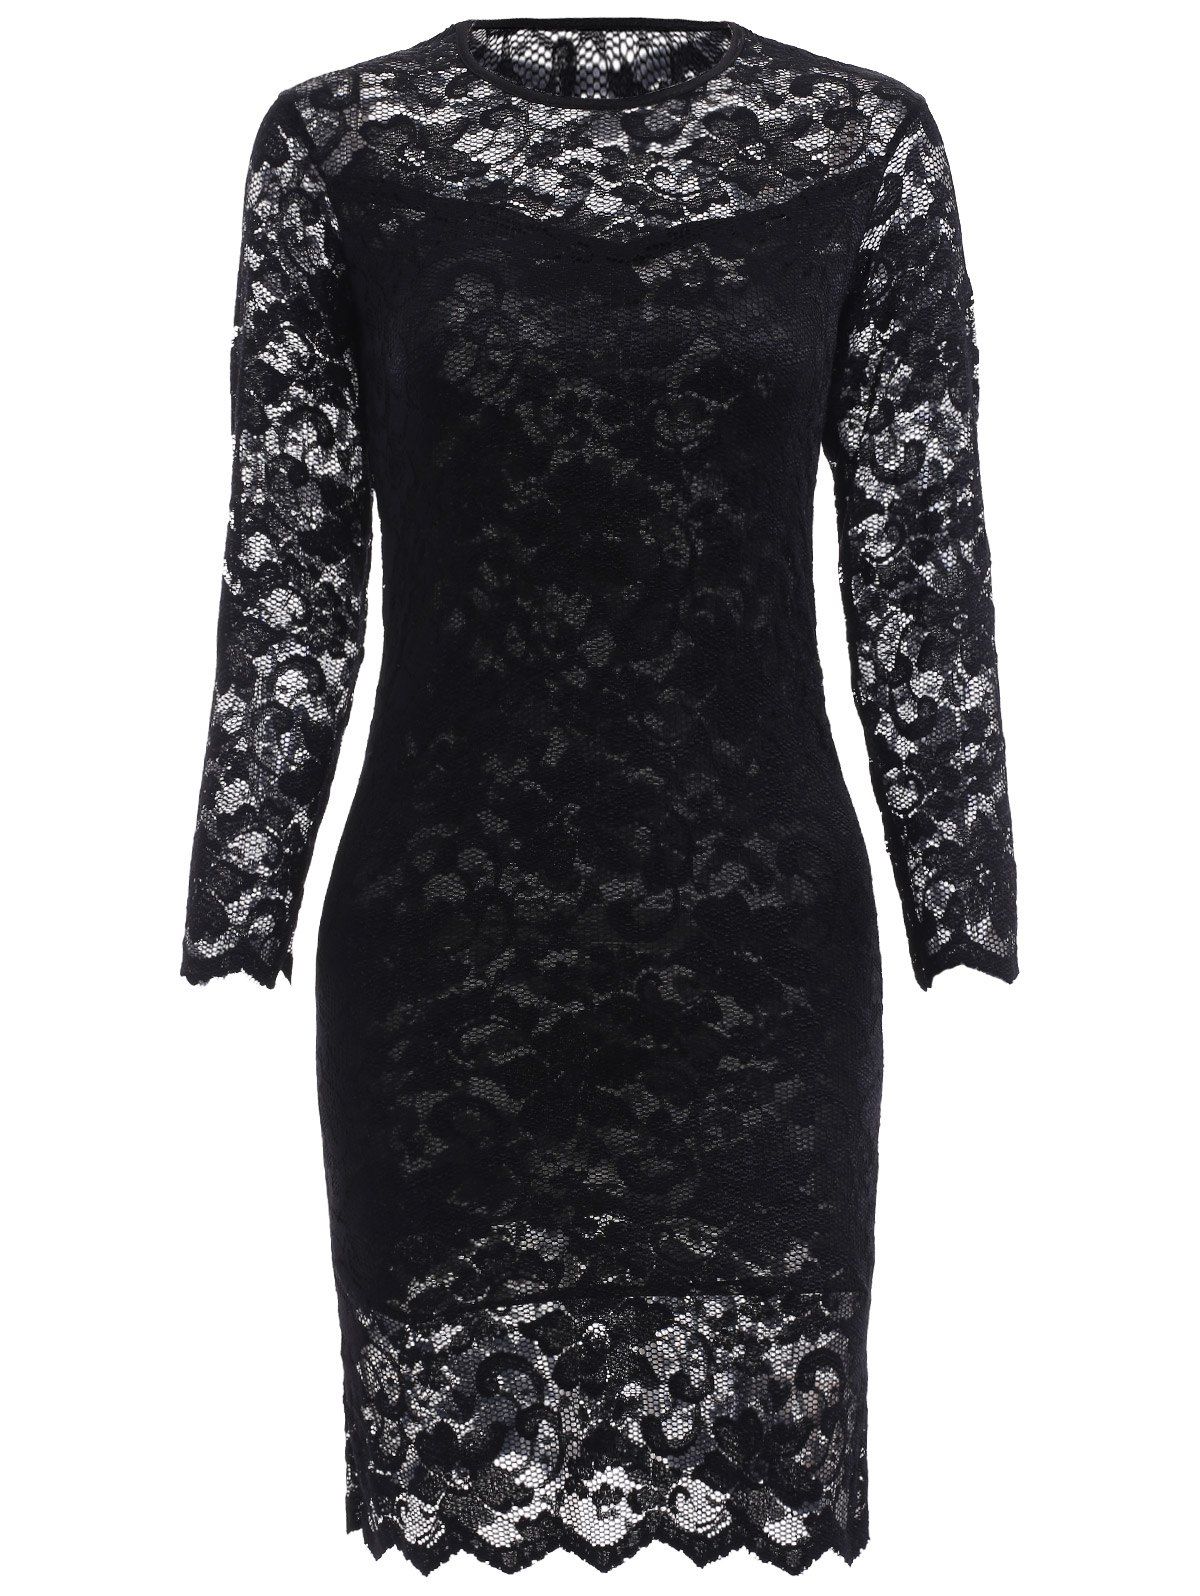 [41% OFF] 2021 Lace Tight Homecoming Dress With Sleeves In BLACK ...